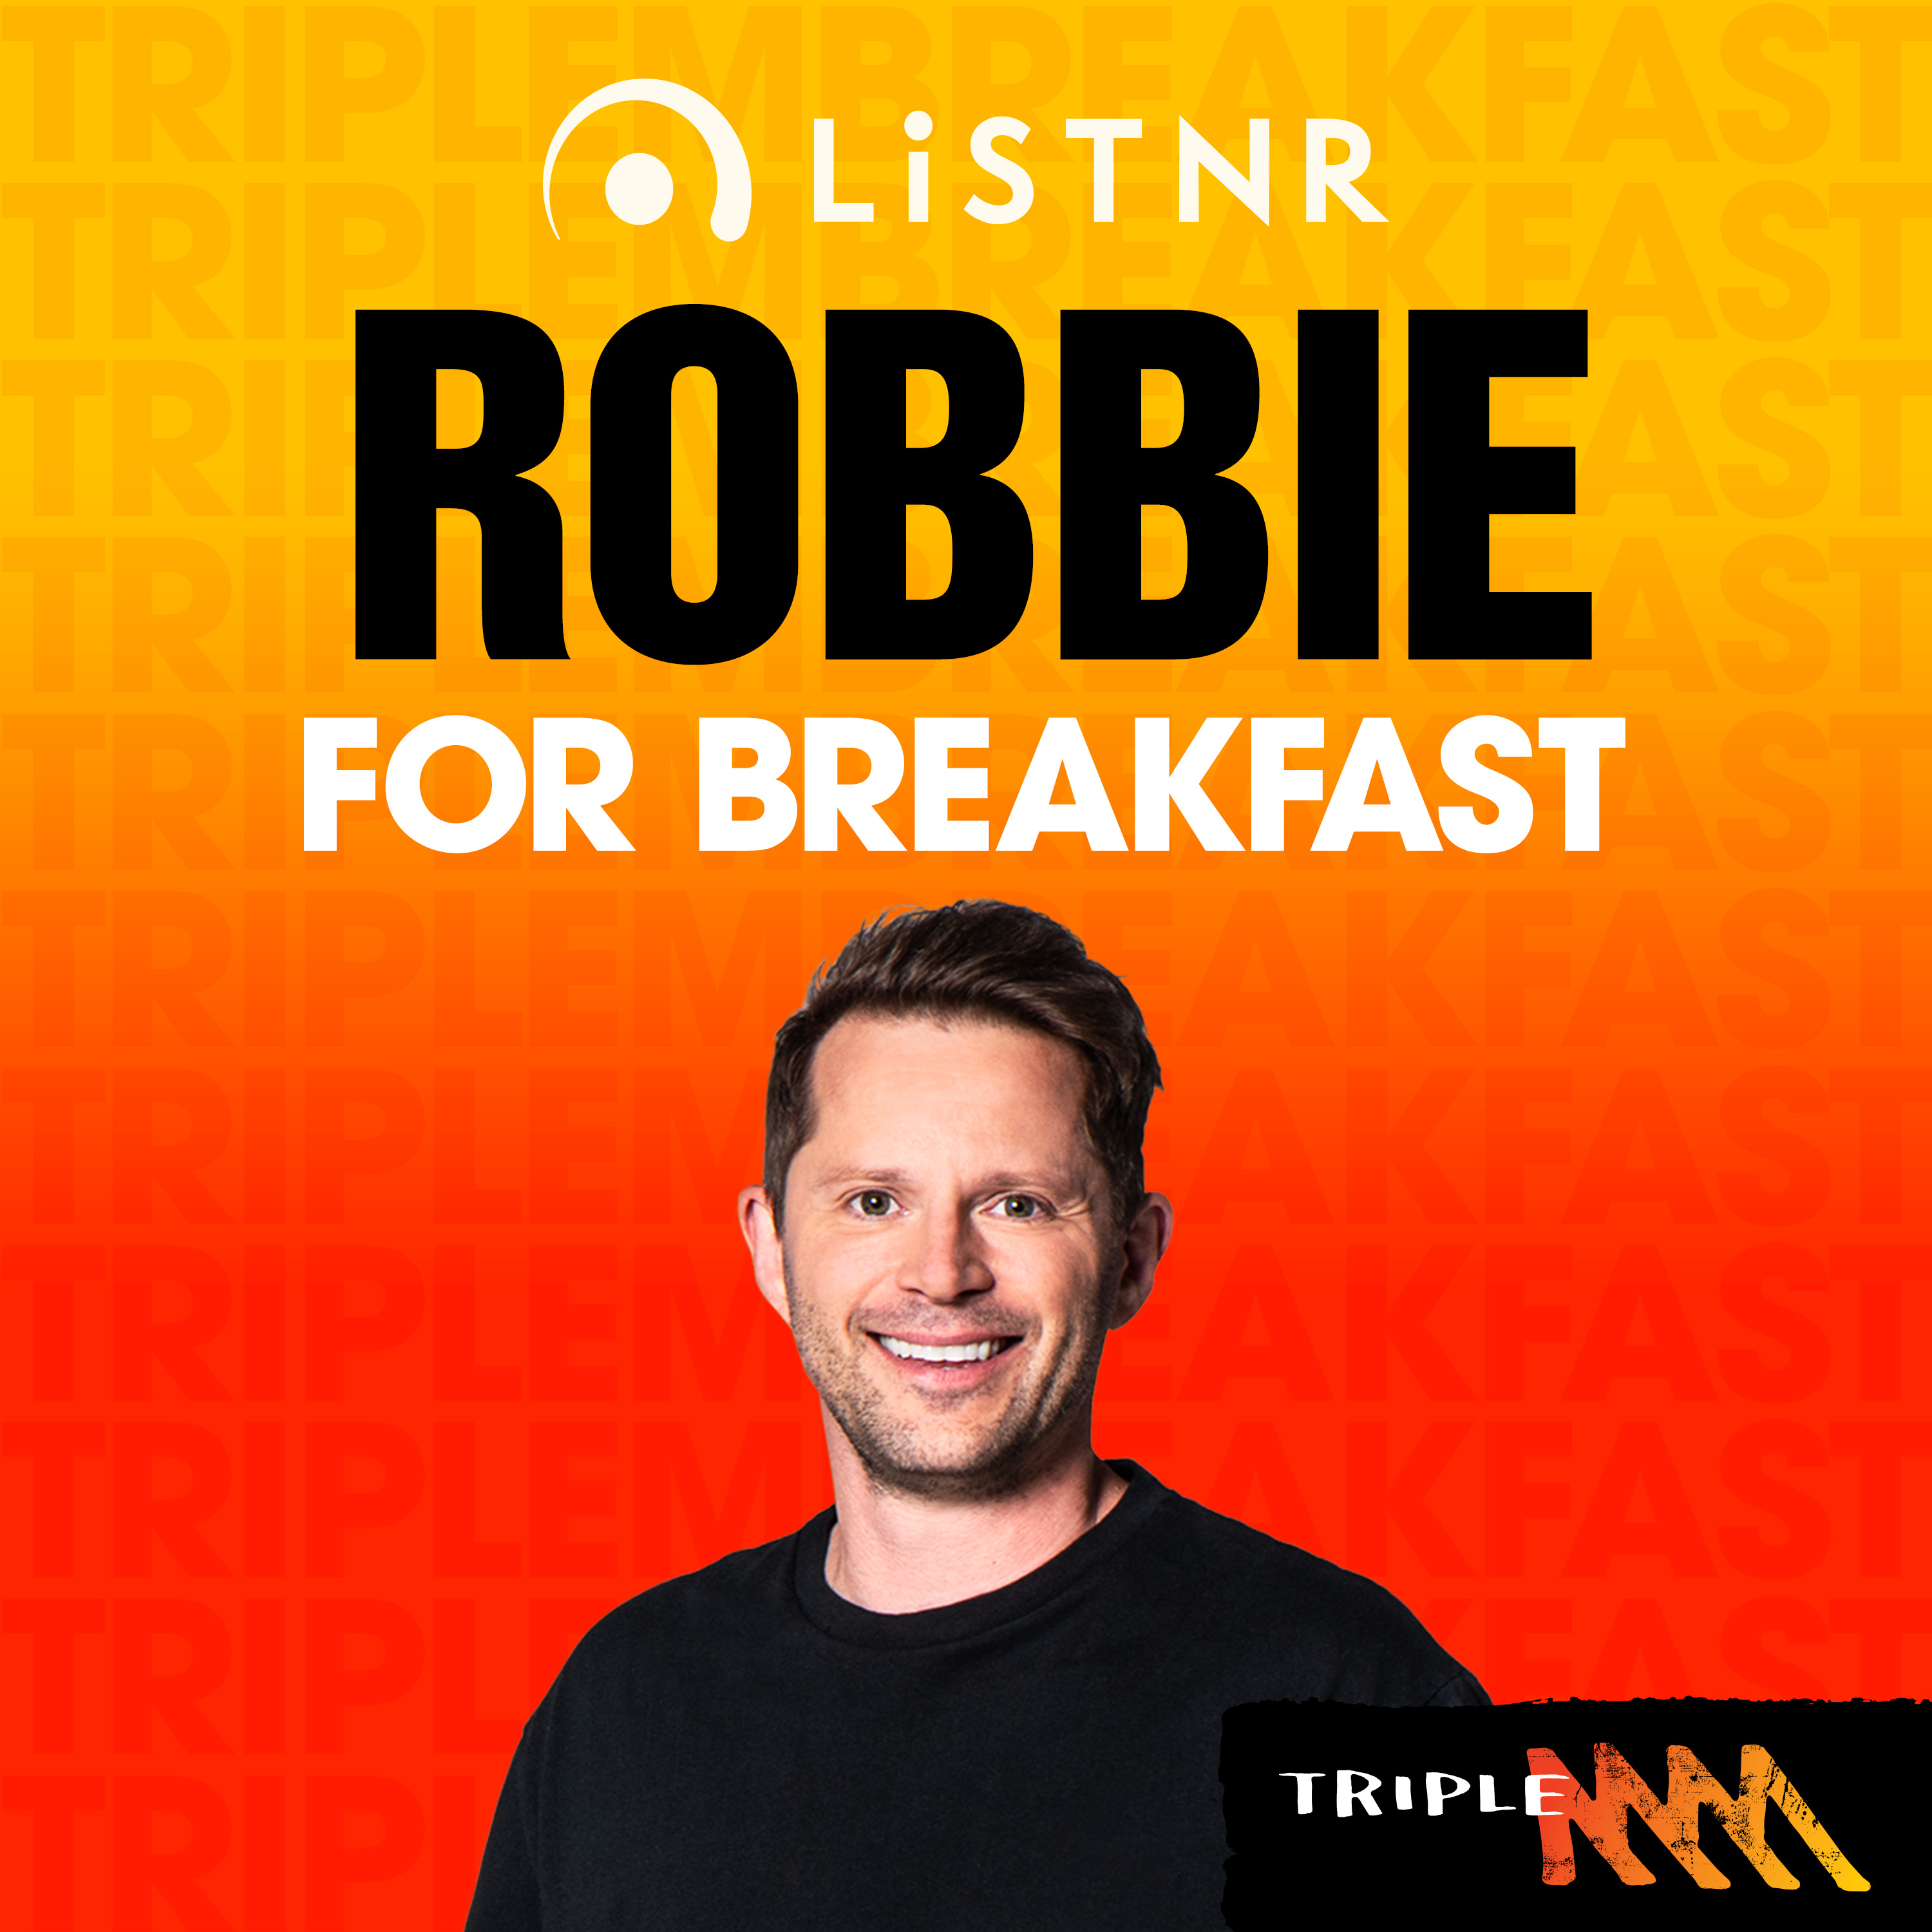 ROBBIE FOR BREAKFAST | Skye Wheatley from I'm A Celeb... Get Me Out Of Here! | Sofia Levin from Masterchef Australia 16 | ...and More Reality TV Fun!